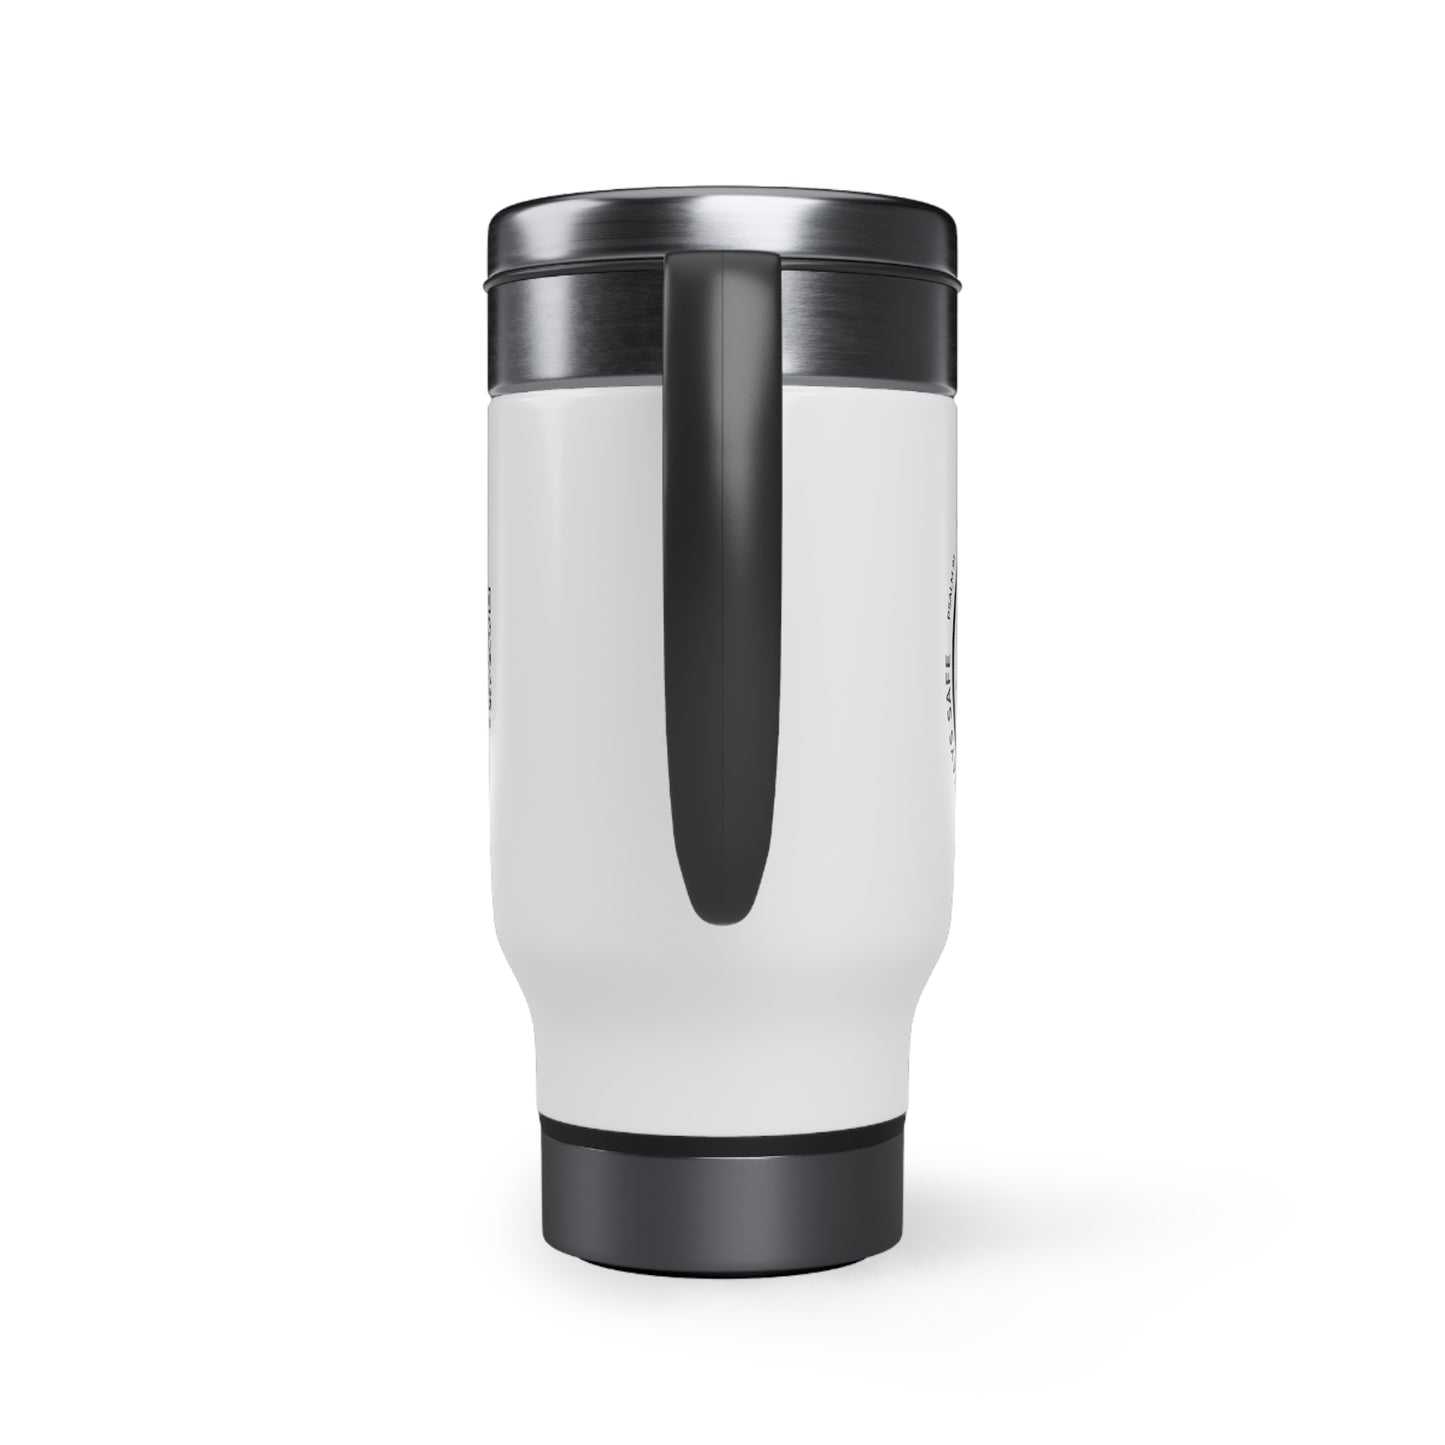 AS Logo Stainless Steel Travel Mug with Handle, 14oz